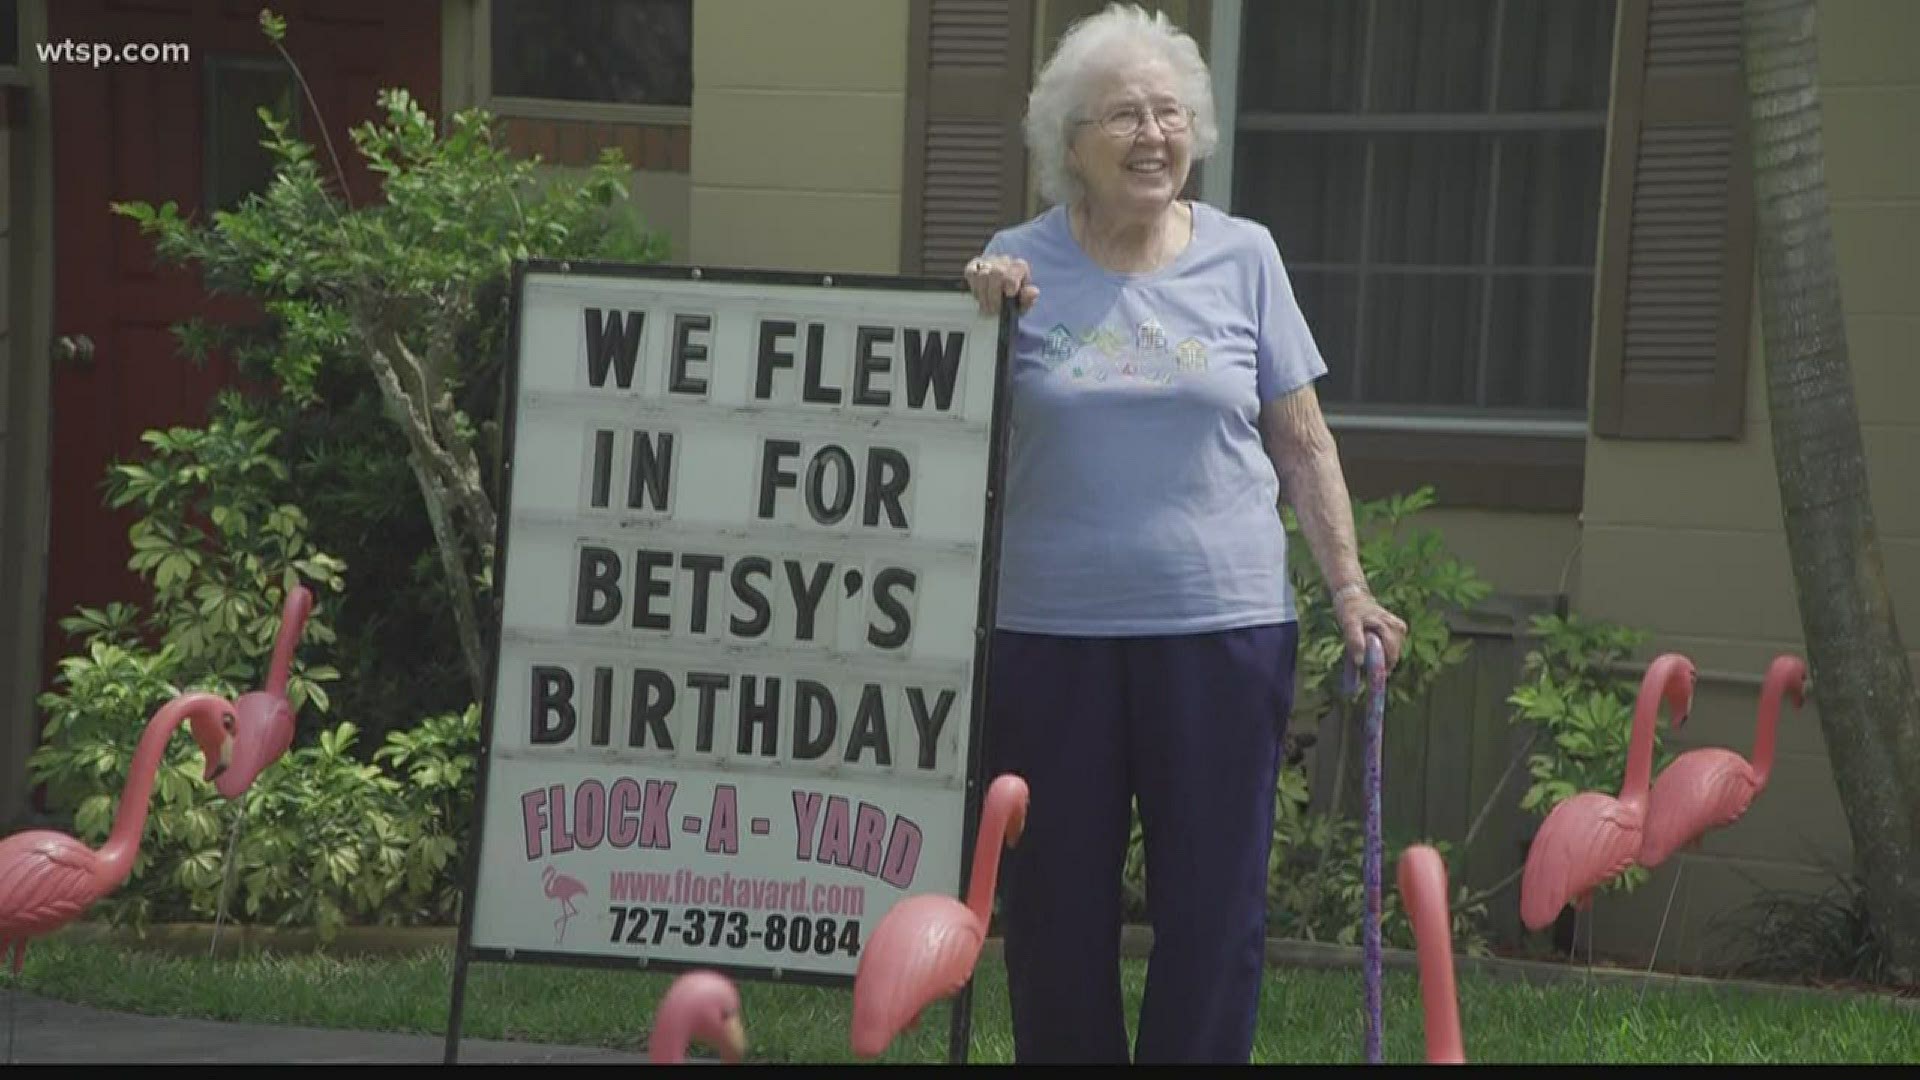 Neighbors Surprise RS Women With 90th Birthday Party - SweetwaterNOW